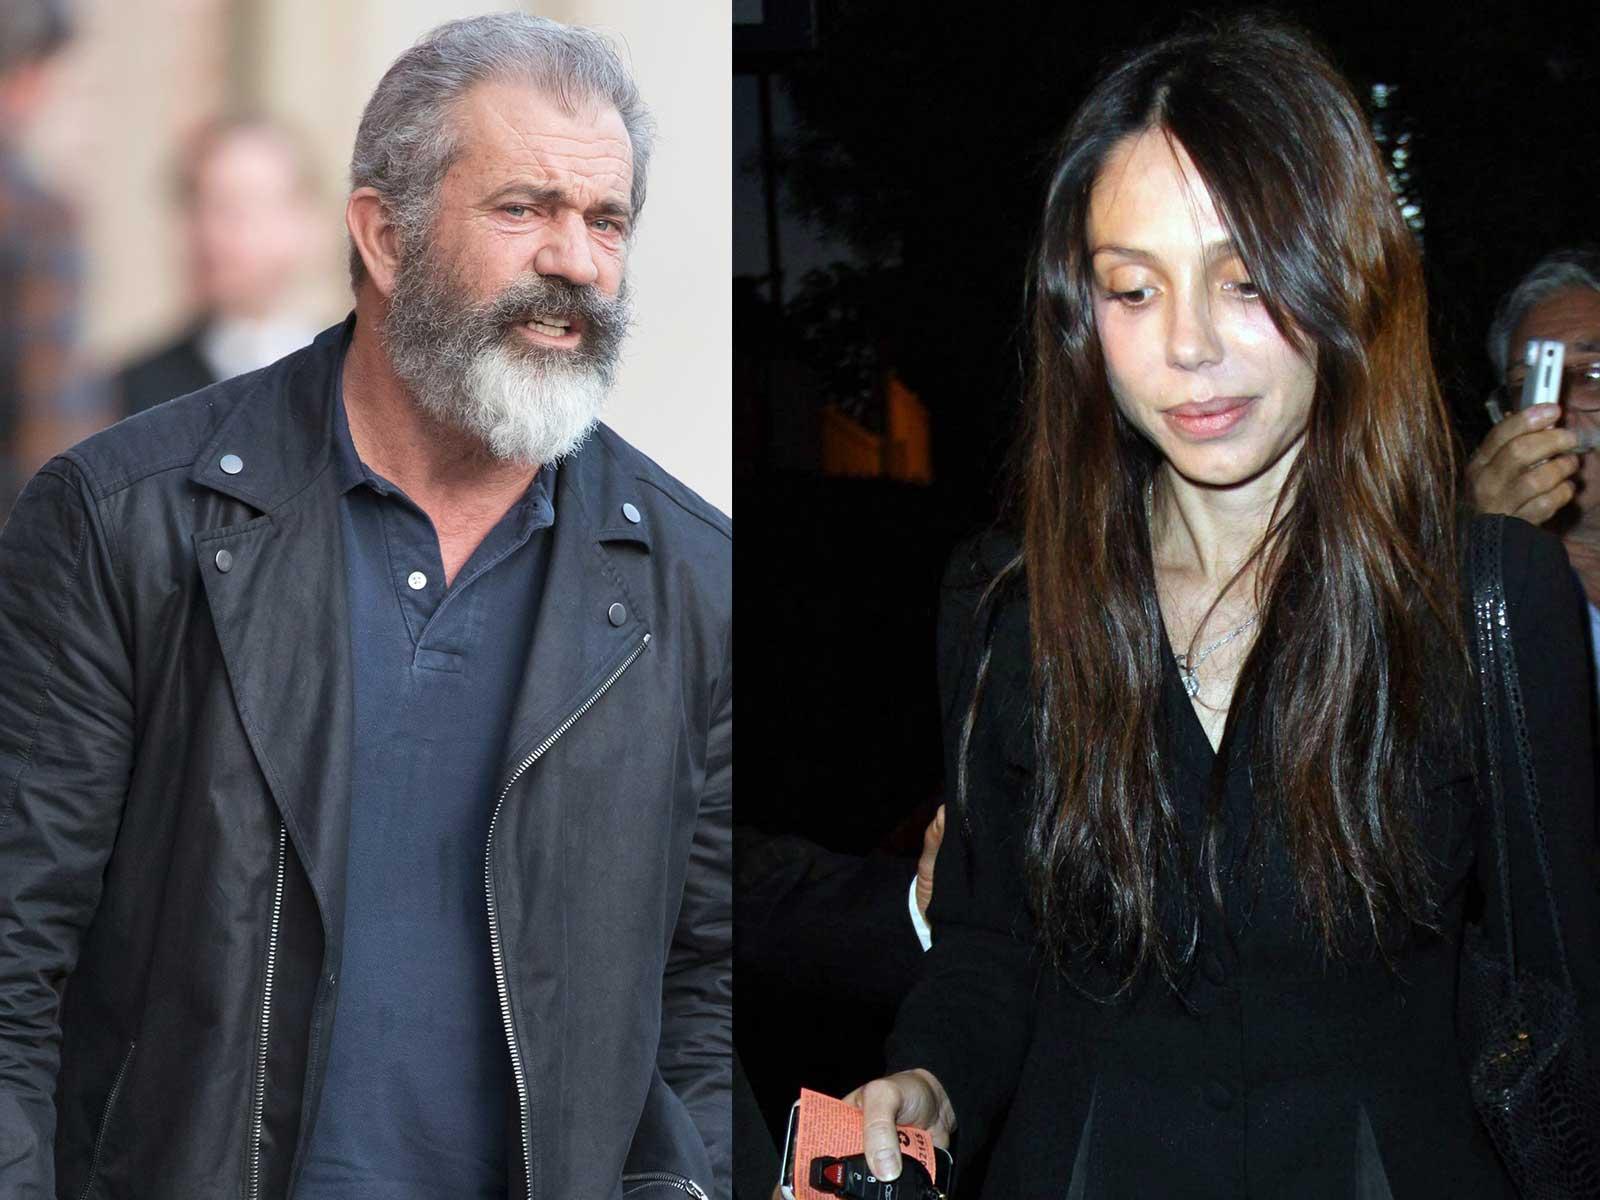 Mel Gibson’s Ex Says She’s Suffering from PTSD Over Assault By Actor